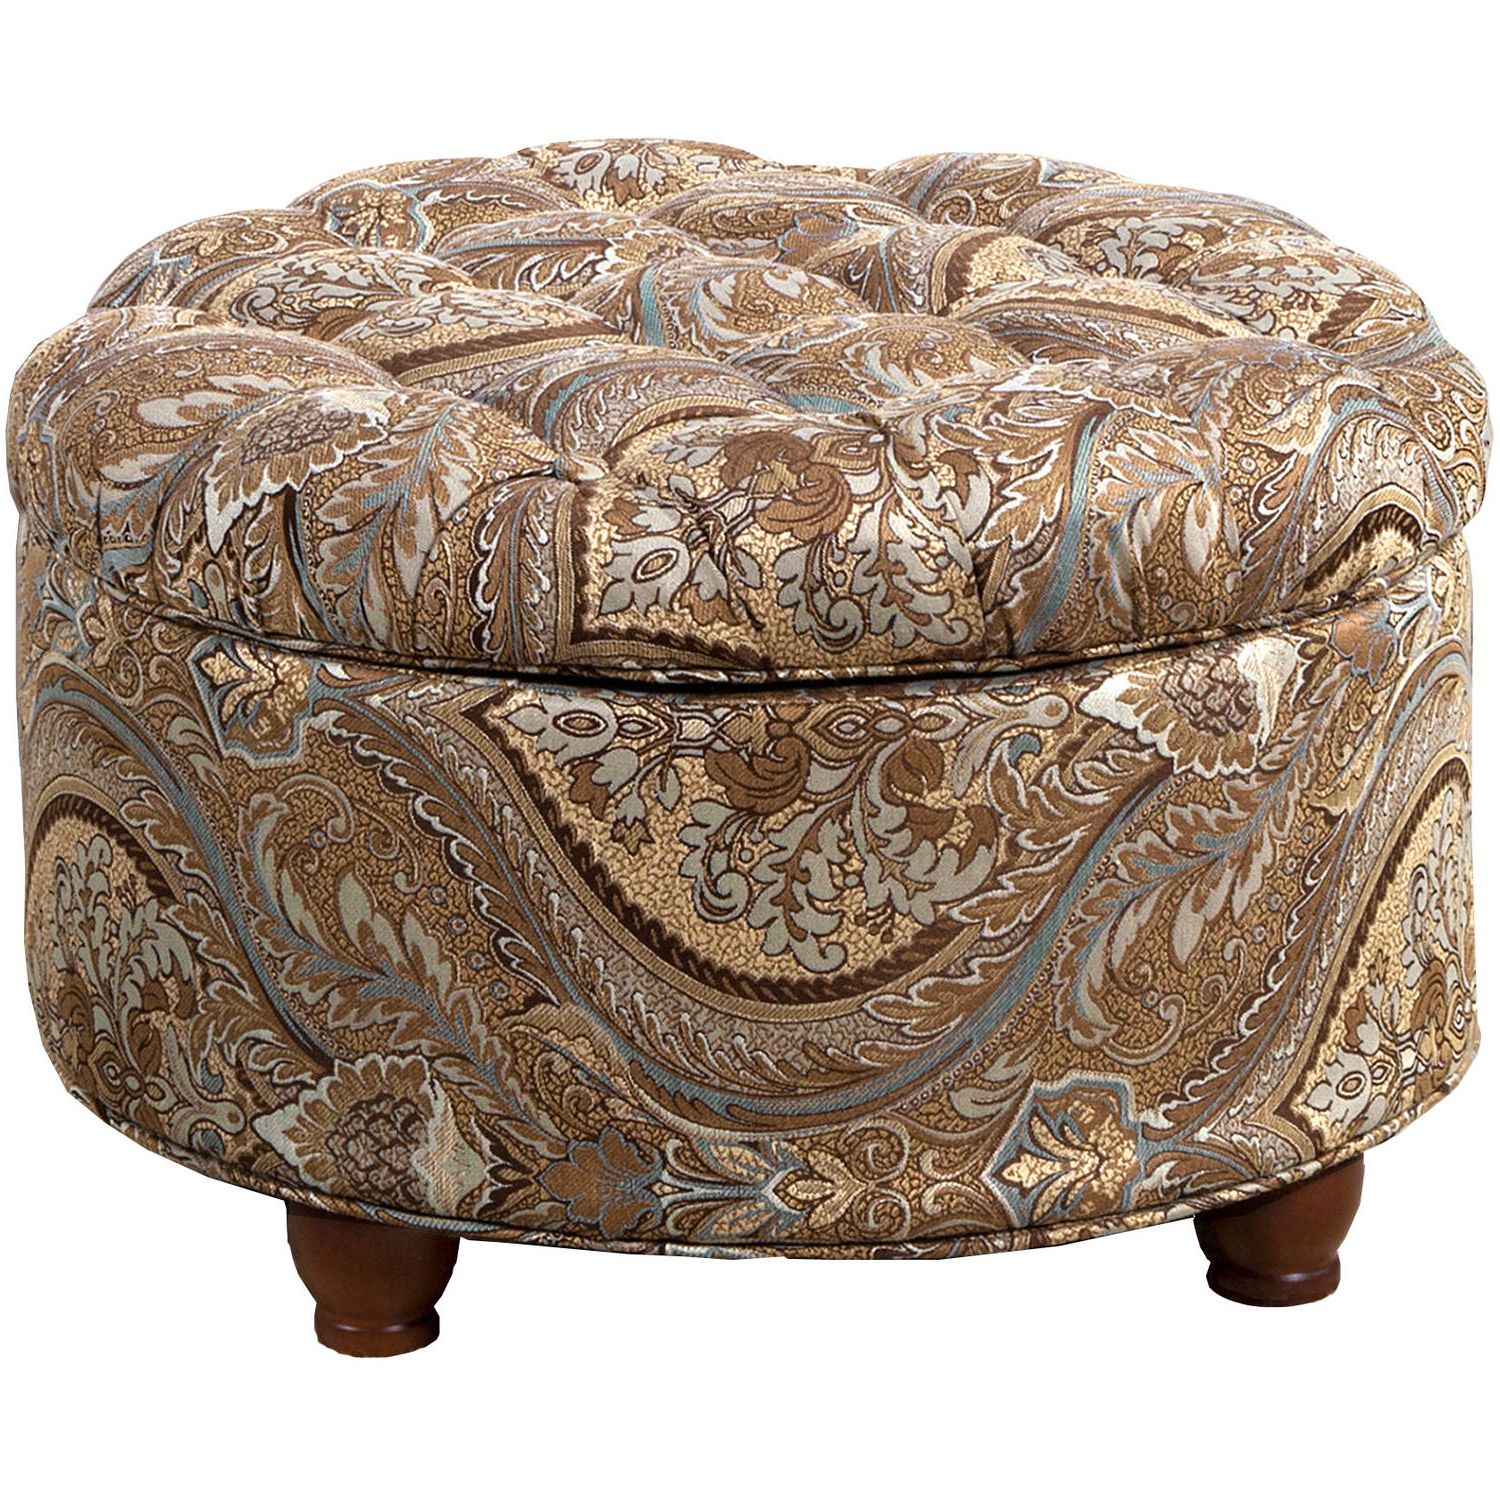 Famous Fabric Tufted Storage Ottomans Throughout Homepop Large Tufted Round Storage Ottoman, Multiple Colors – Walmart (View 8 of 10)